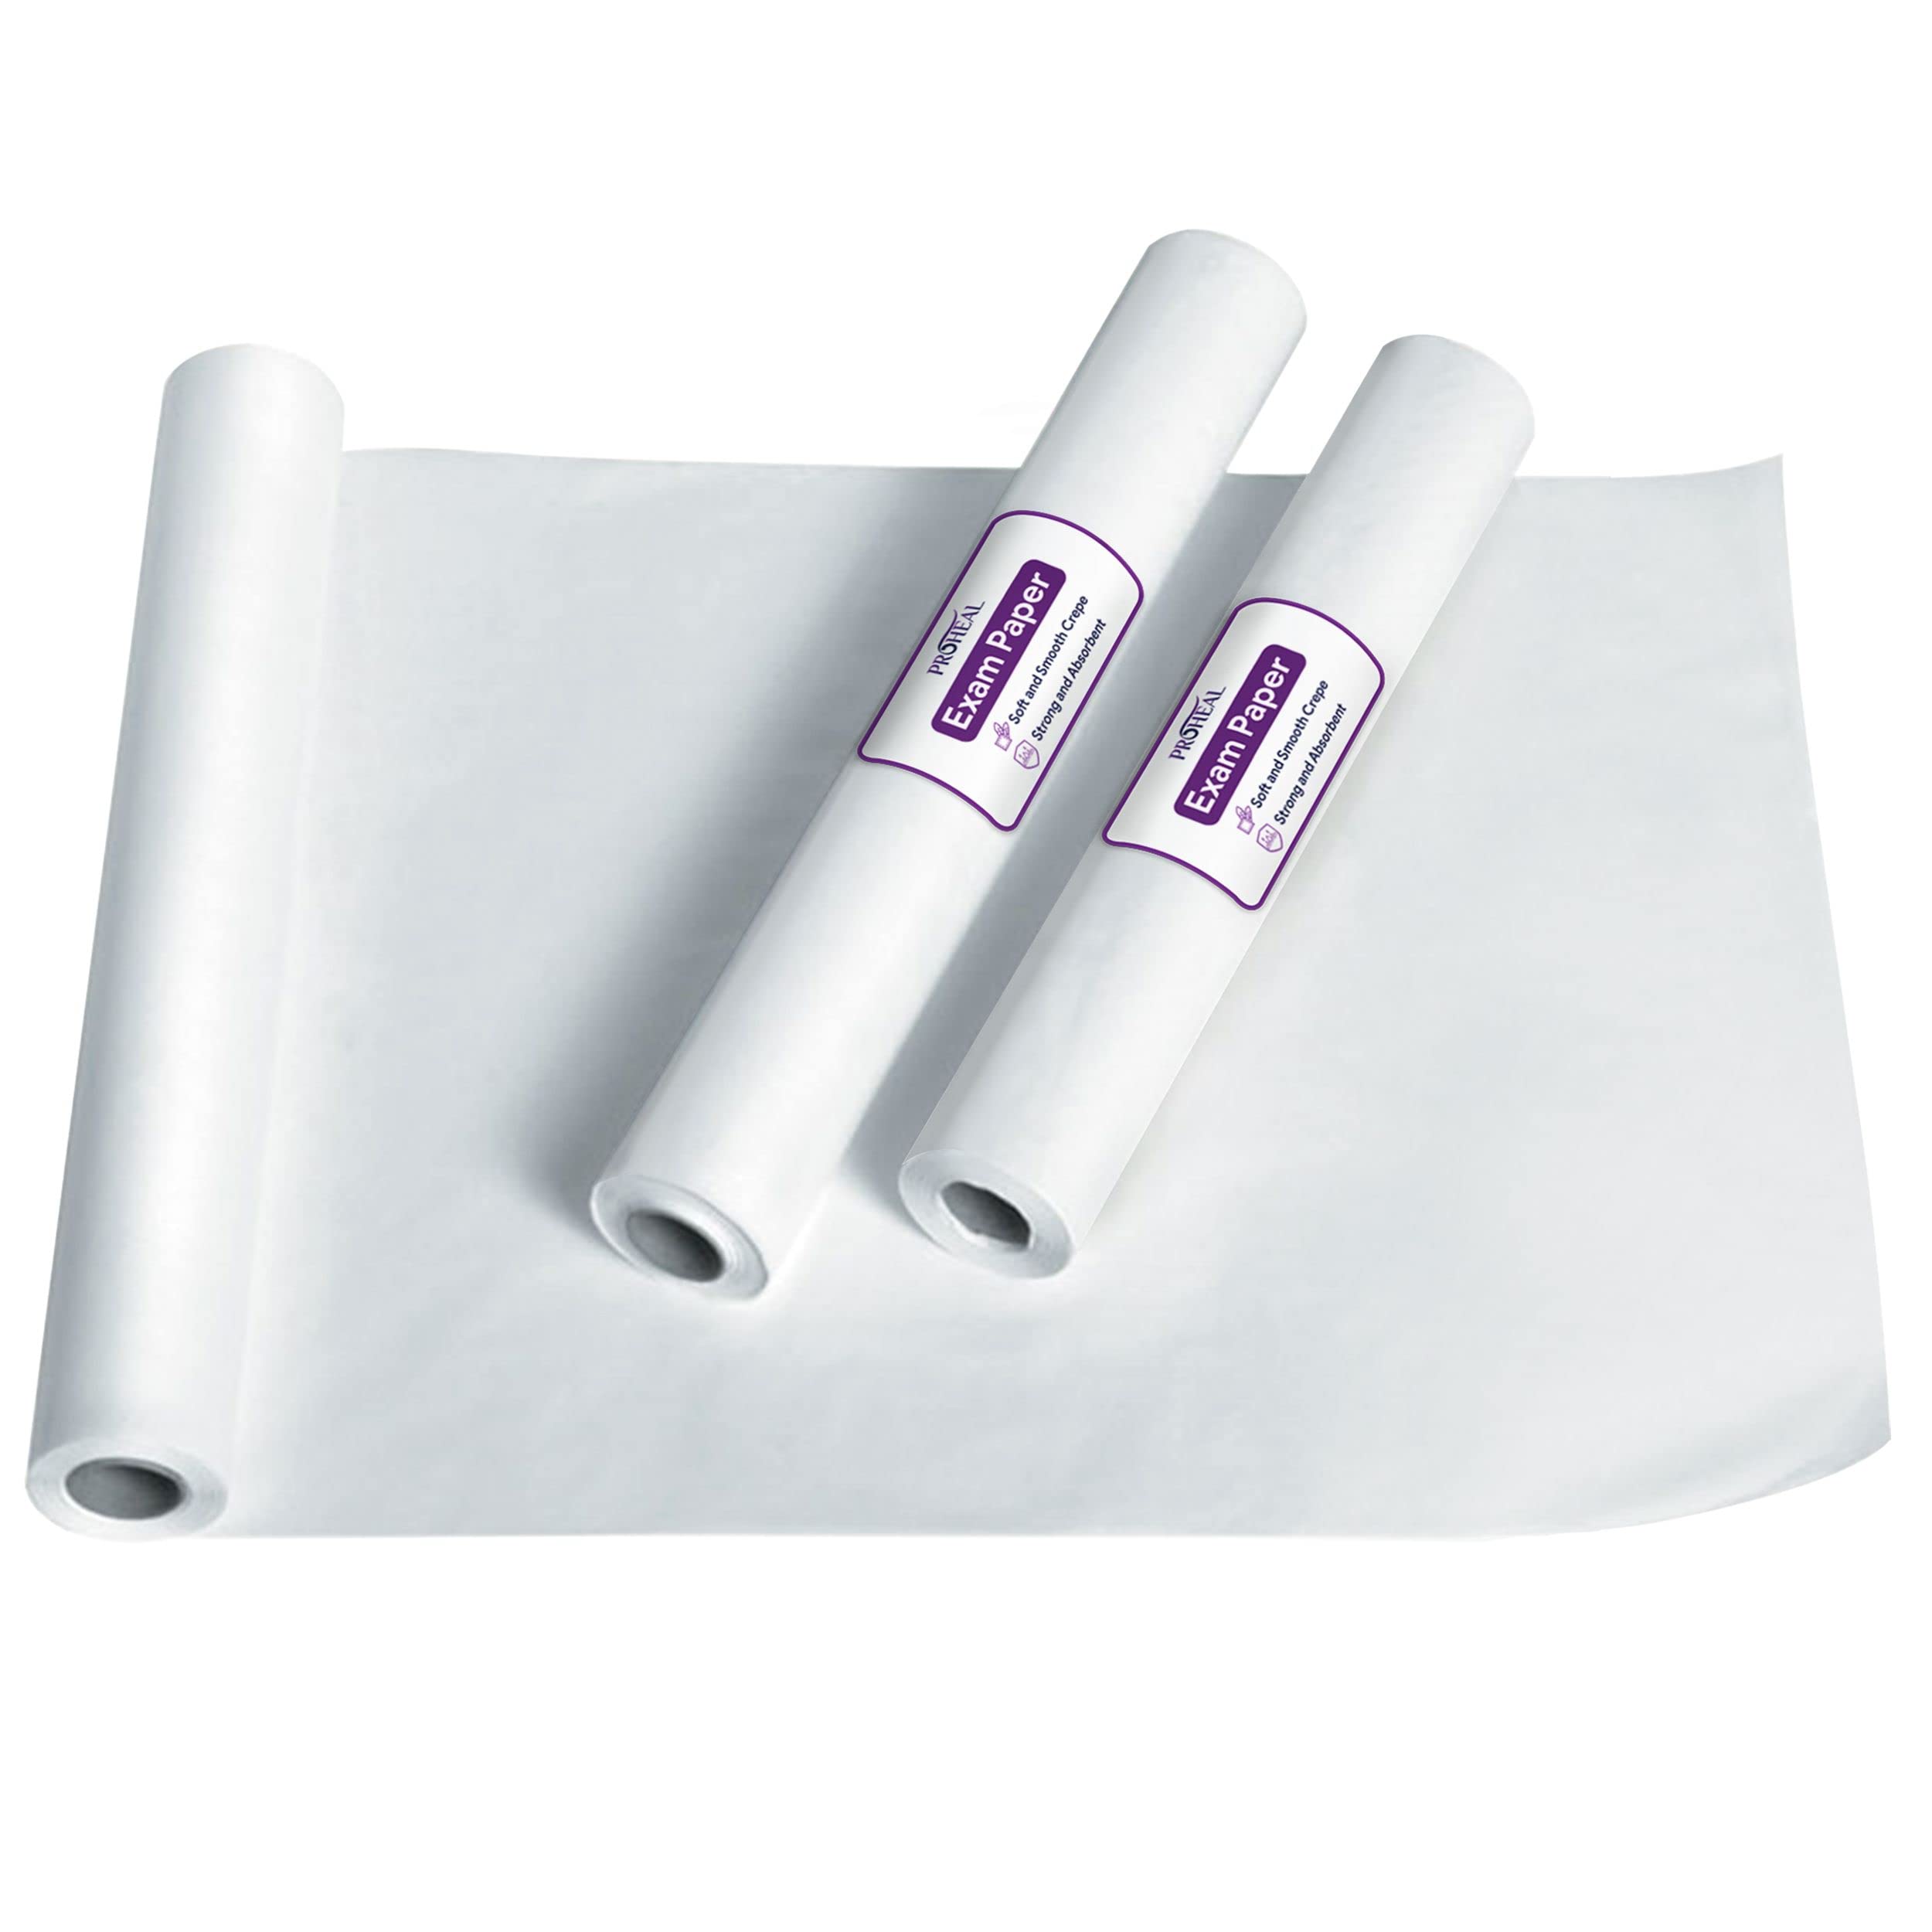 Exam Table Paper - High-Quality Disposable Exam Paper - Soft and Smooth Chiropractic Face Paper and Changing Table Paper - Strong and Absorbent Bed Paper Roll Medical  - Like New